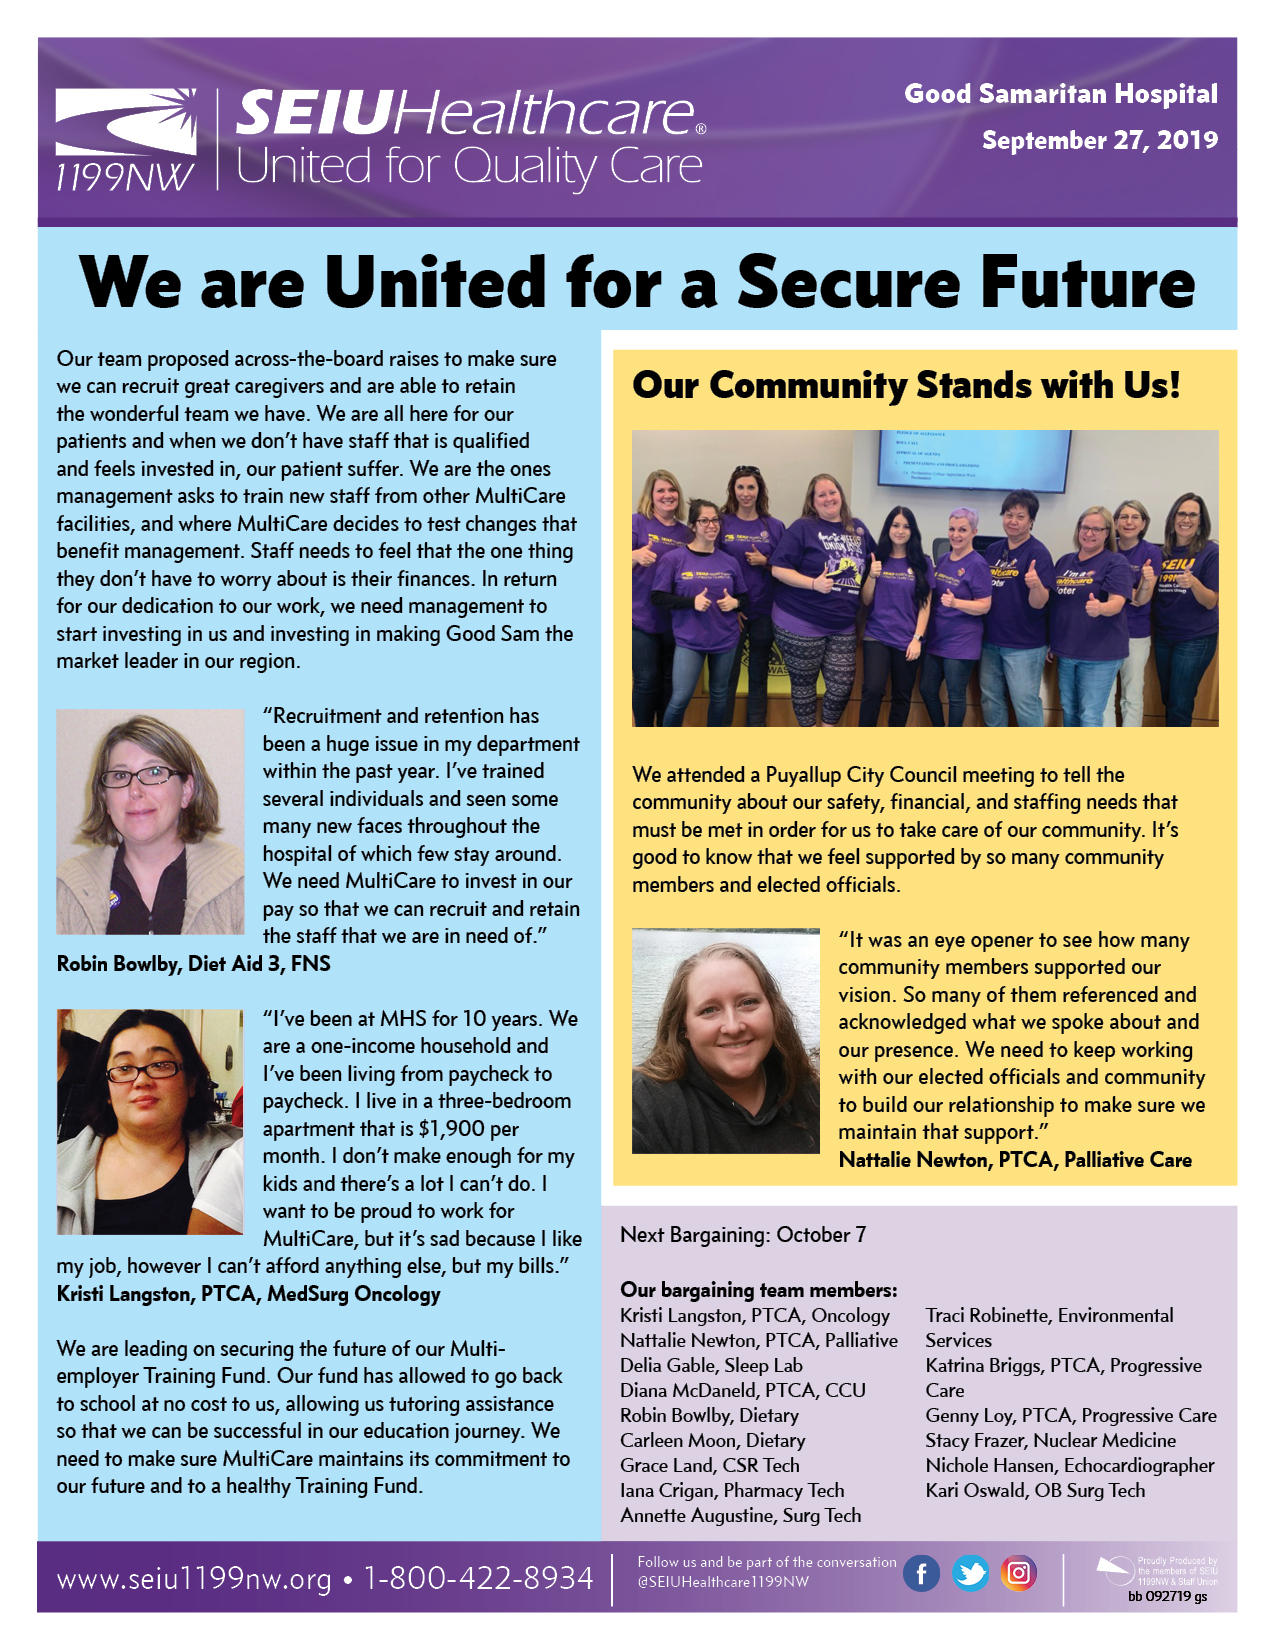 We are United for a Secure Future